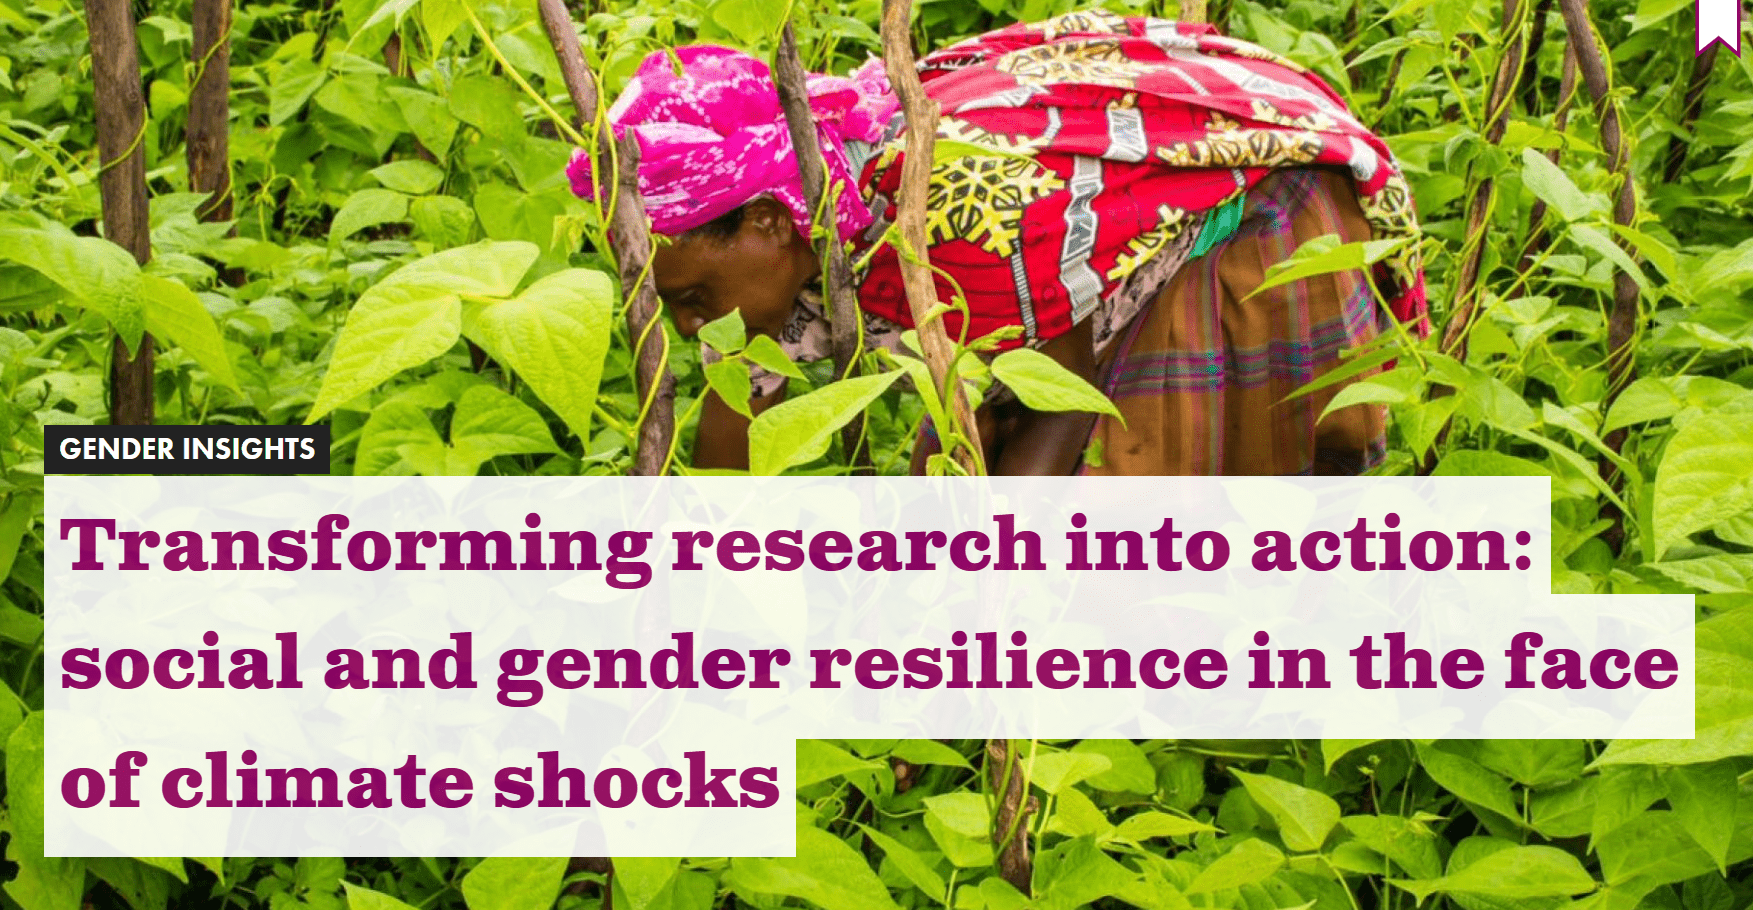 Transforming research into action: social and gender resilience in the face of climate shocks